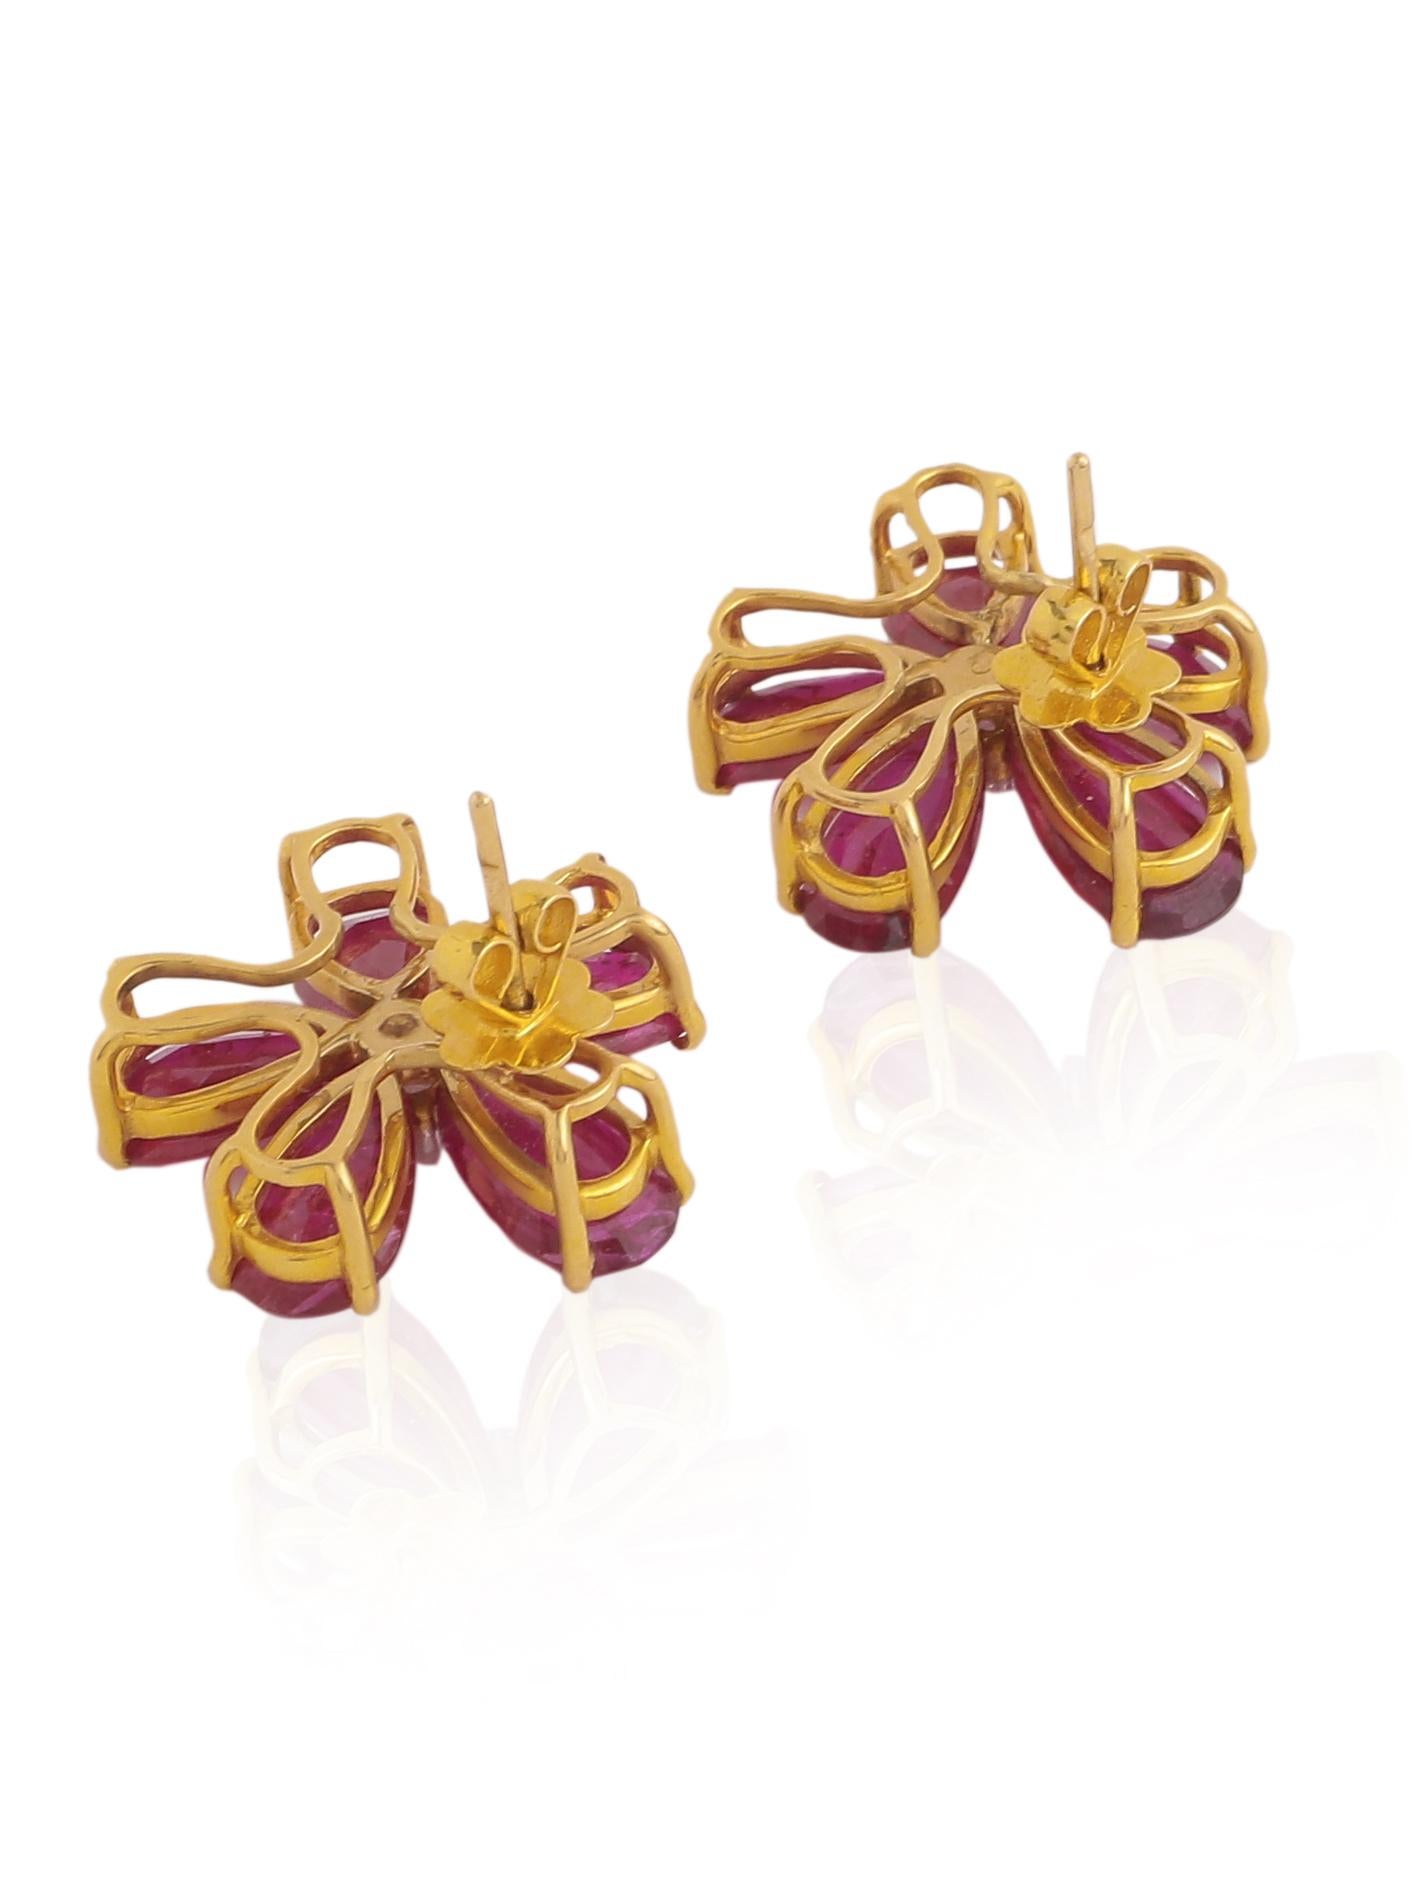 A pair of beautiful Natural Ruby Pears earring with 2 Rose cut diamonds in the centre. The Rubies come from Mozambique and have no treatment in them. The design of the earring is inspired by a flower and the Rubies are set in a way to look like